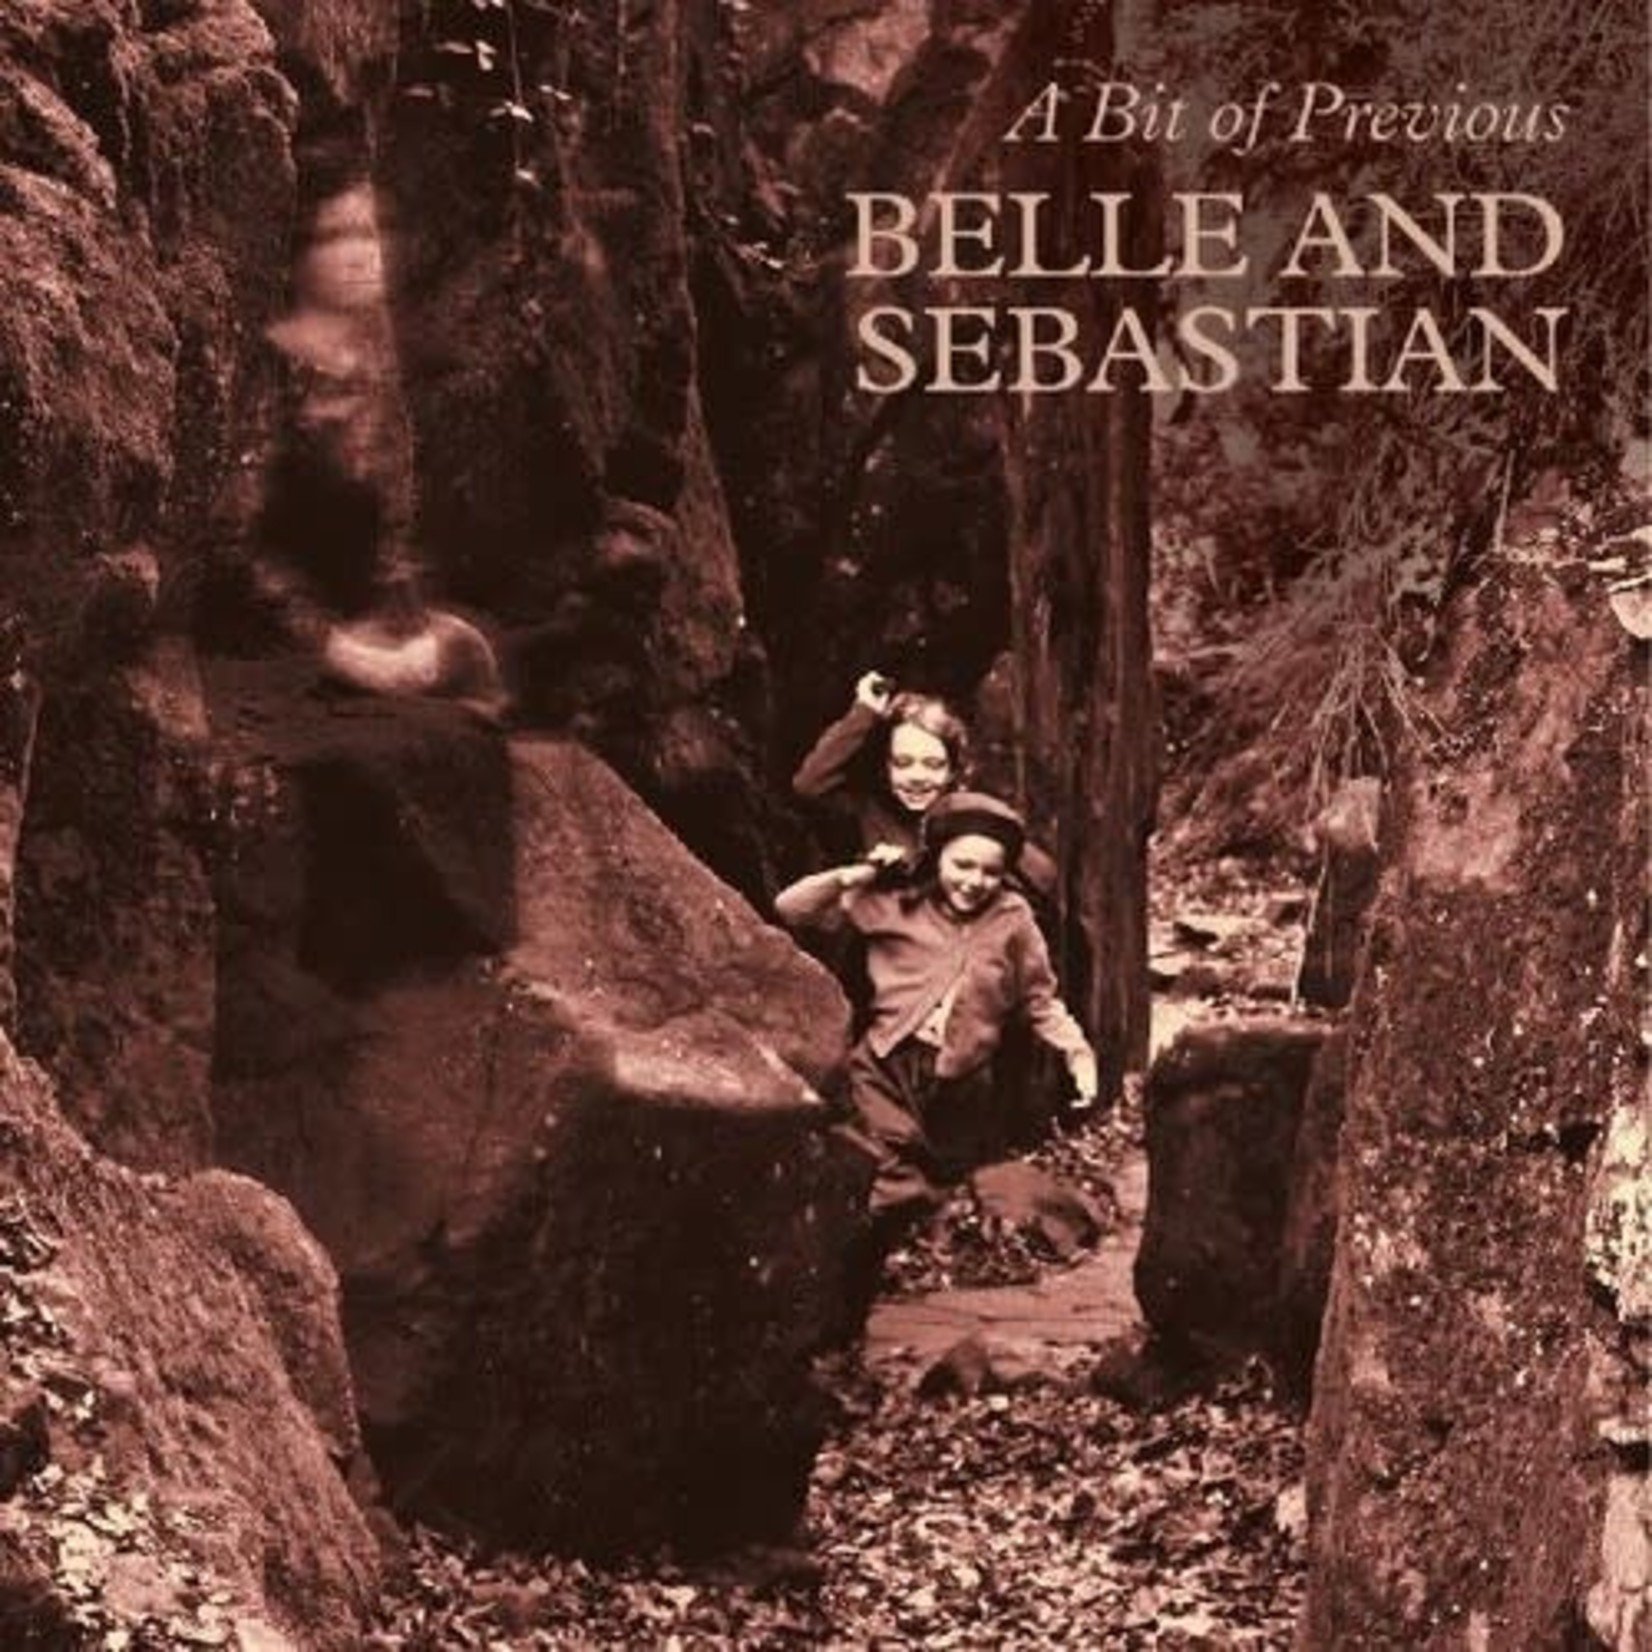 Belle And Sebastian - A Bit Of Previous (Indie Alternate Cover) [LP]